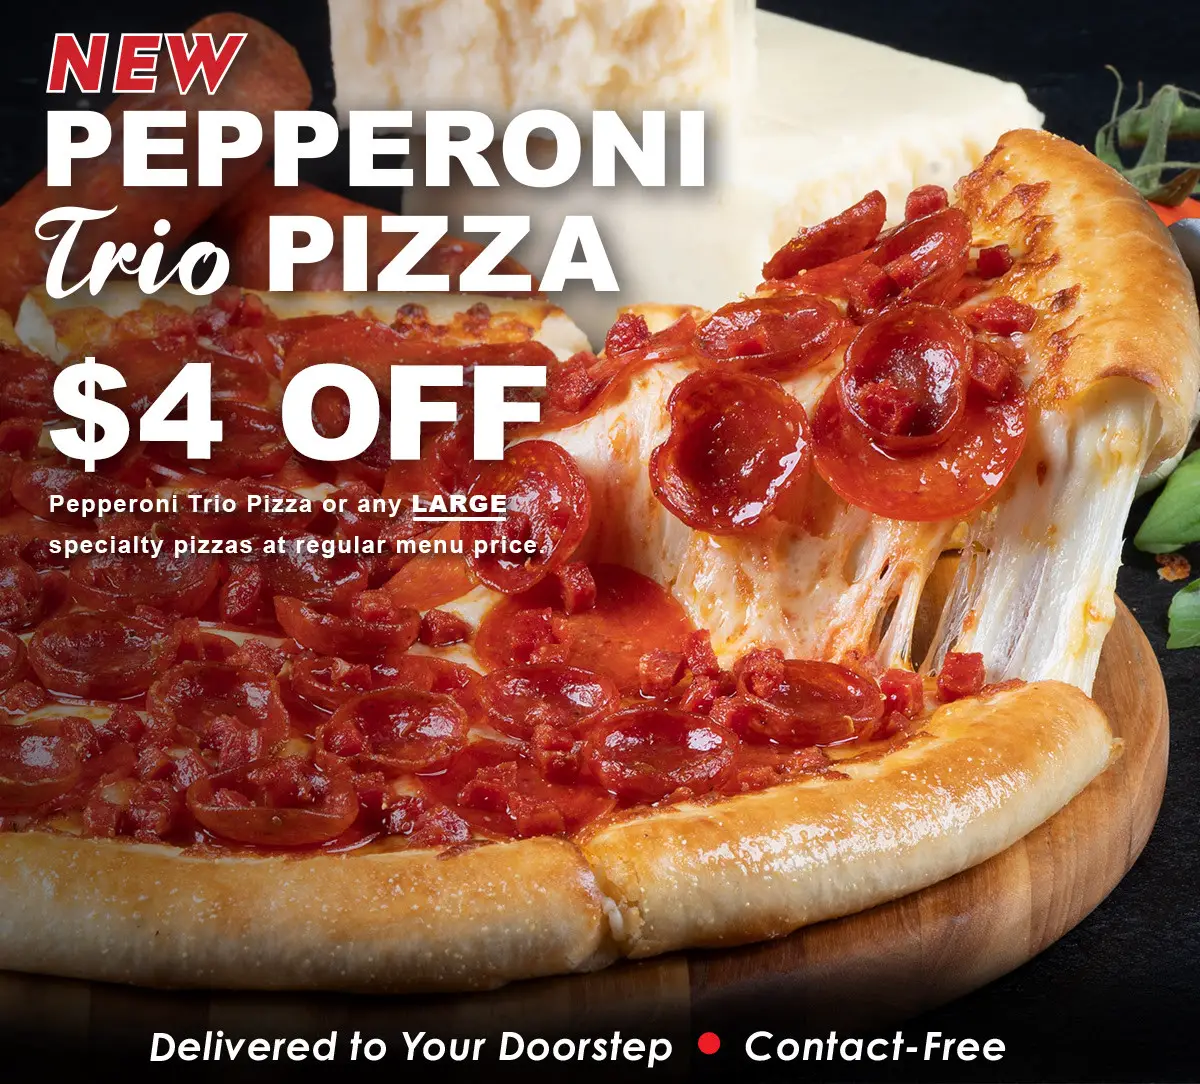 Pizza Guys Thanksgiving Get $4 Off Pepperoni Trio Pizza or Any Specialty Pizza